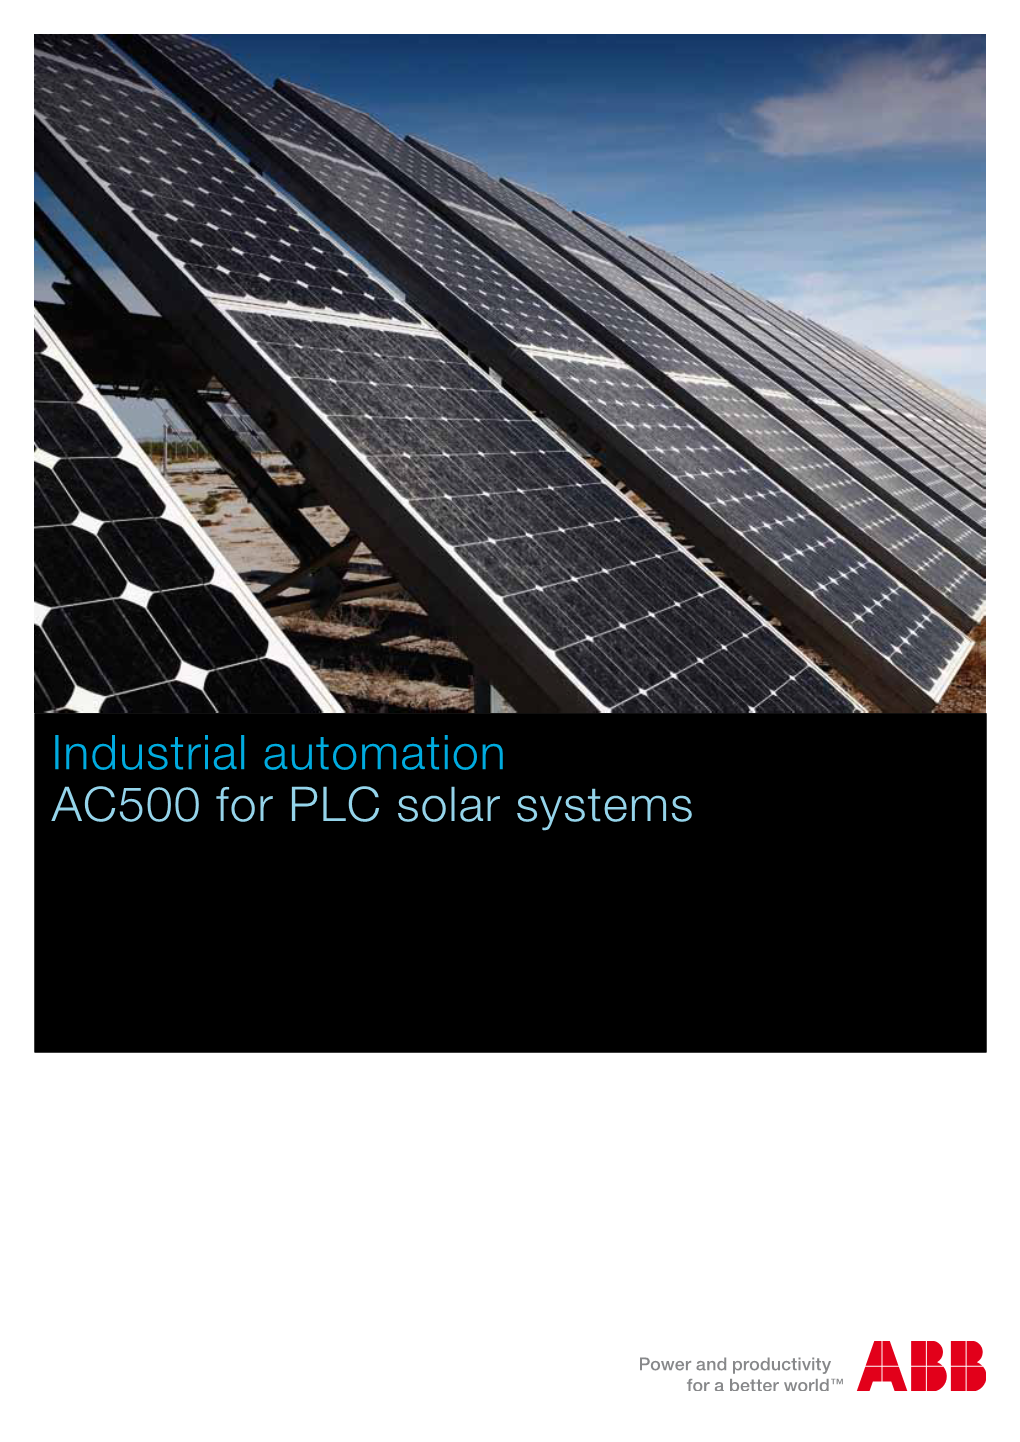 Industrial Automation AC500 for PLC Solar Systems Unlimited Clean Energy with Zero Emissions